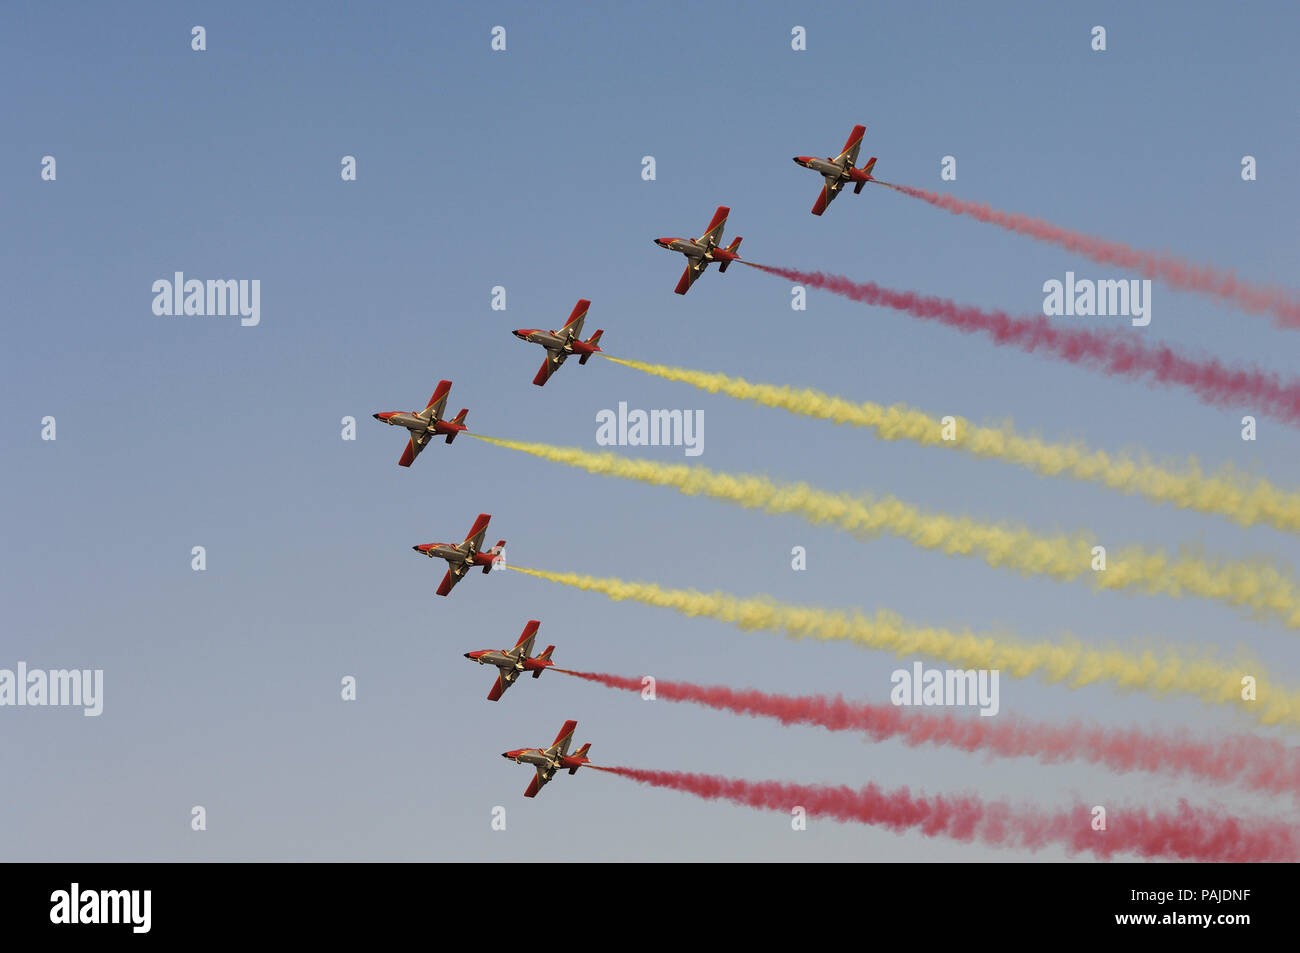 CASA C-101EB Aviojets of Spain - Air Force Patrulla Acrobatica Aguila flying in formation with red and yellow smoke at Dubai AirShow 2007 Stock Photo